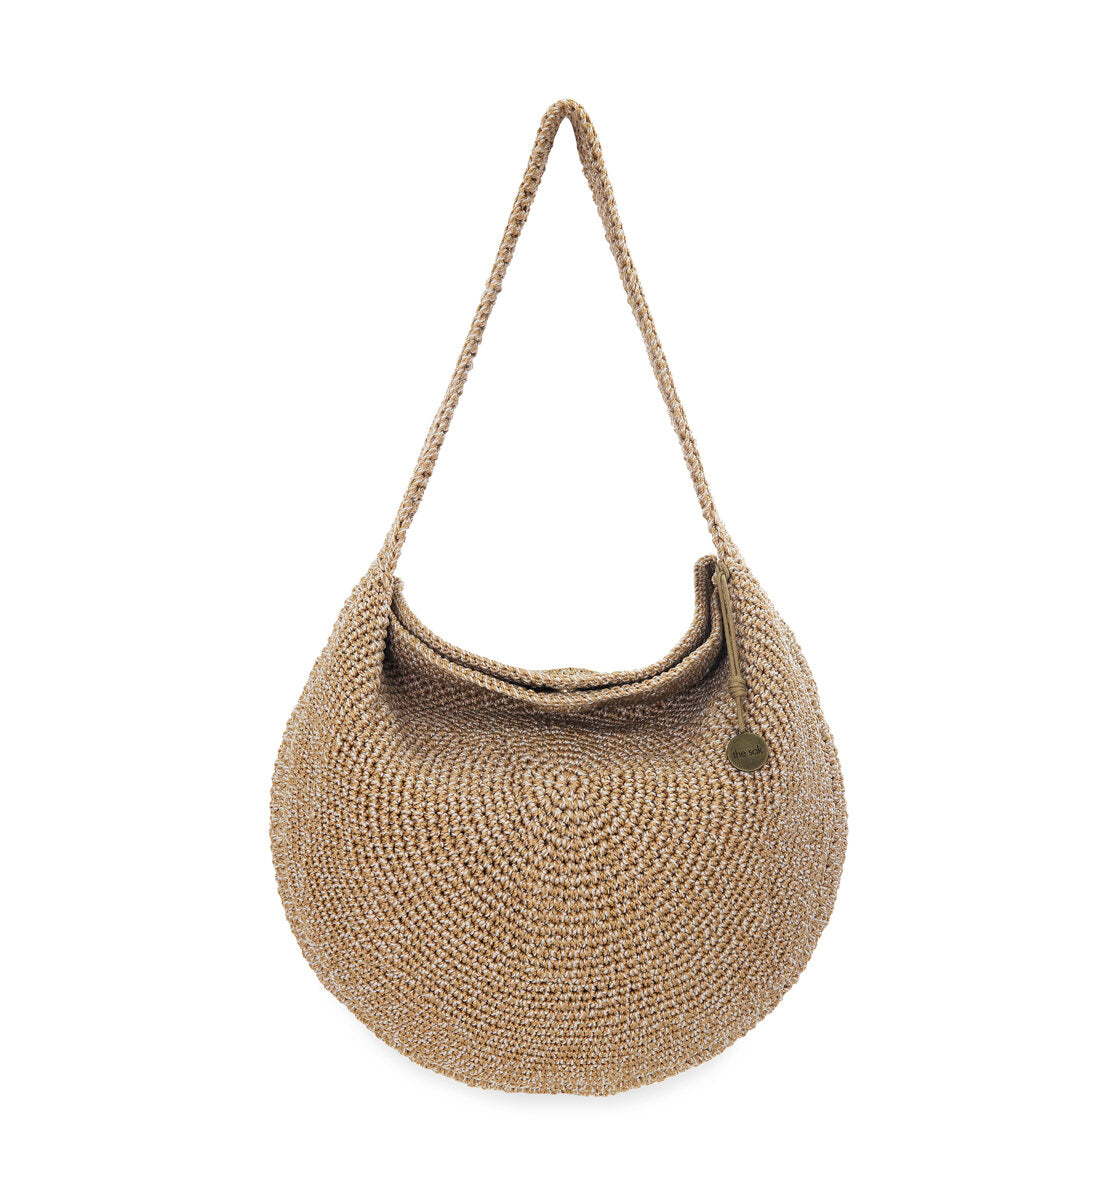 Anise Hobo featured in the Sak's sustainable spring bag collection.